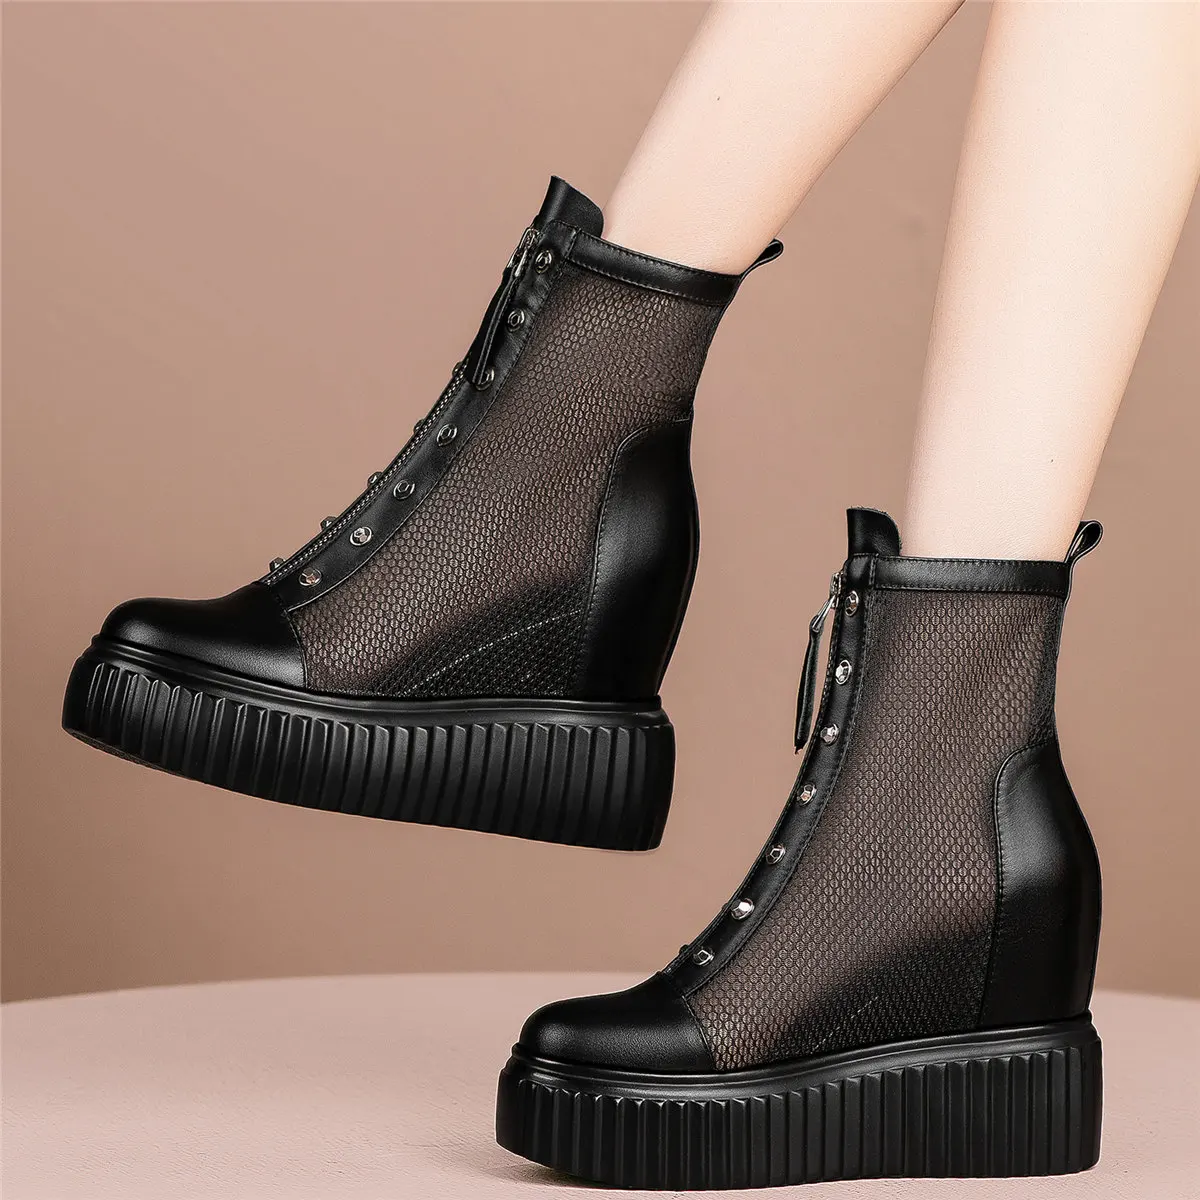 

Height Increasing Platform Shoe Women's Genuine Leather Sandals Ankle Boots Wedge High Heels Punk Goth Creeper Oxfords Front Zip